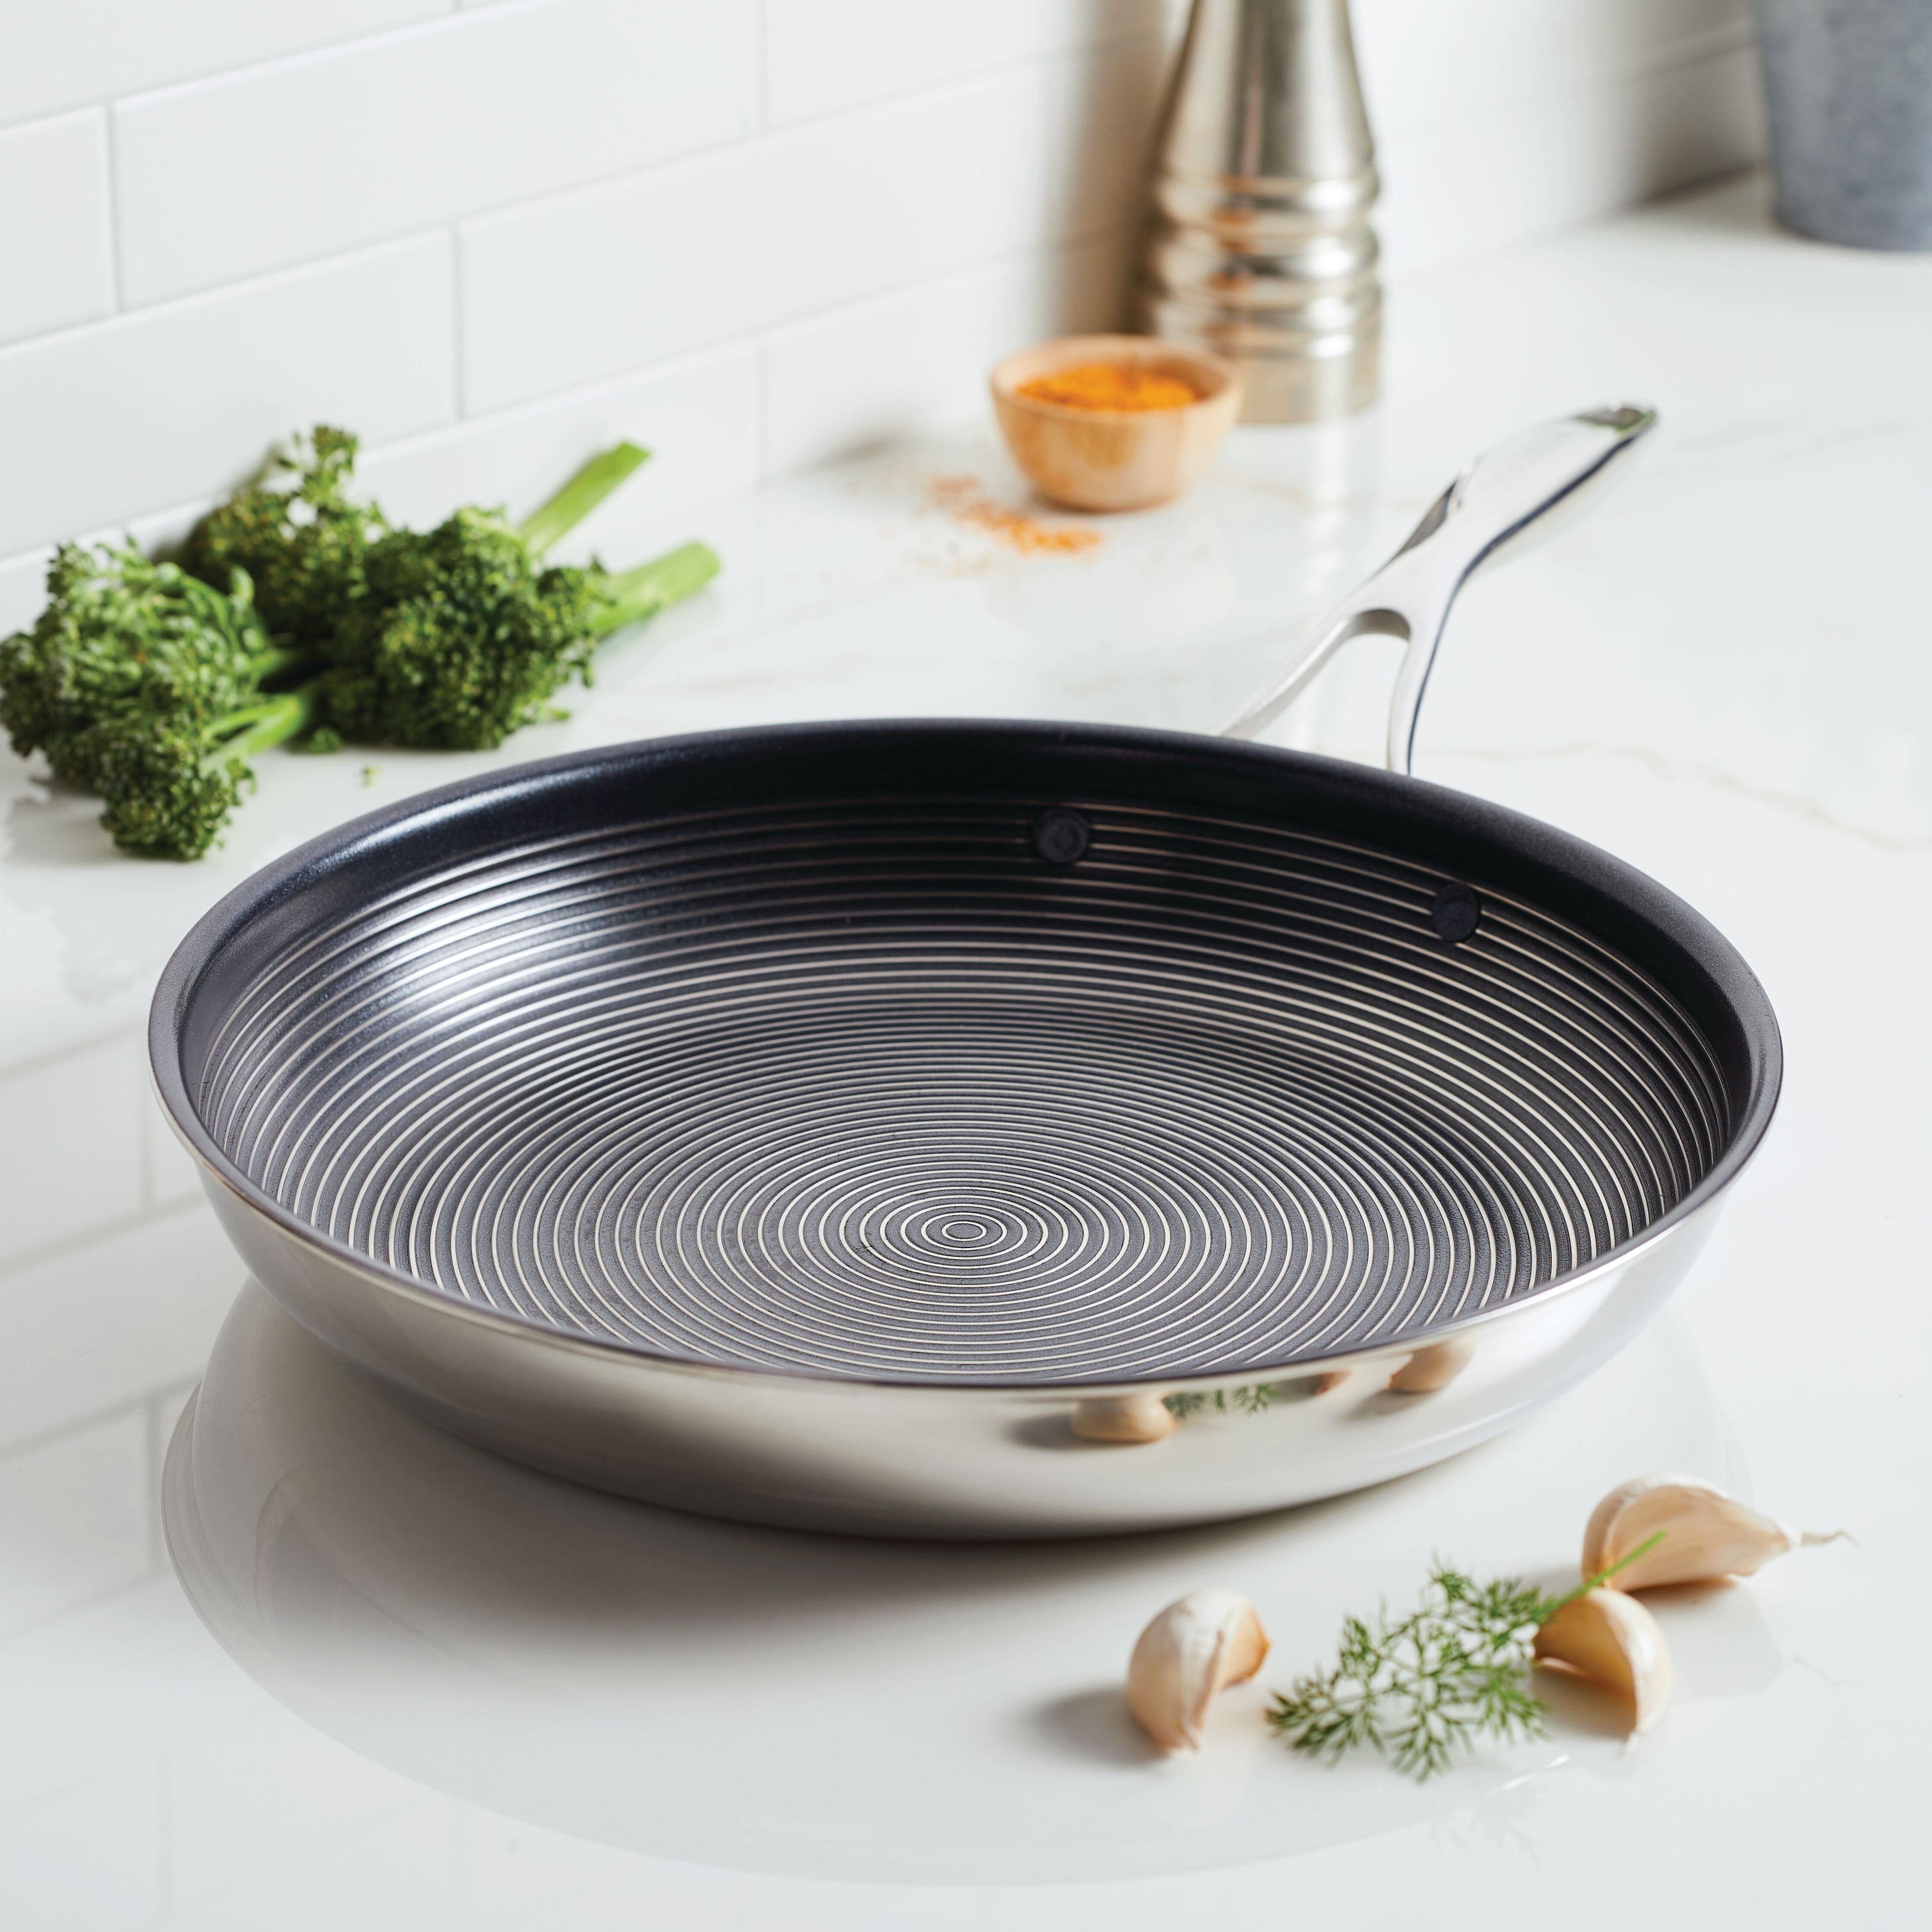 https://ak1.ostkcdn.com/images/products/is/images/direct/74d55af94aed6eb61a27f91cab4d18fcbdcb4a35/Circulon-Clad-Stainless-Steel-Induction-Frying-Pan-with-Hybrid-SteelShield-and-Nonstick-Technology%2C-12.5-Inch%2C-Silver.jpg